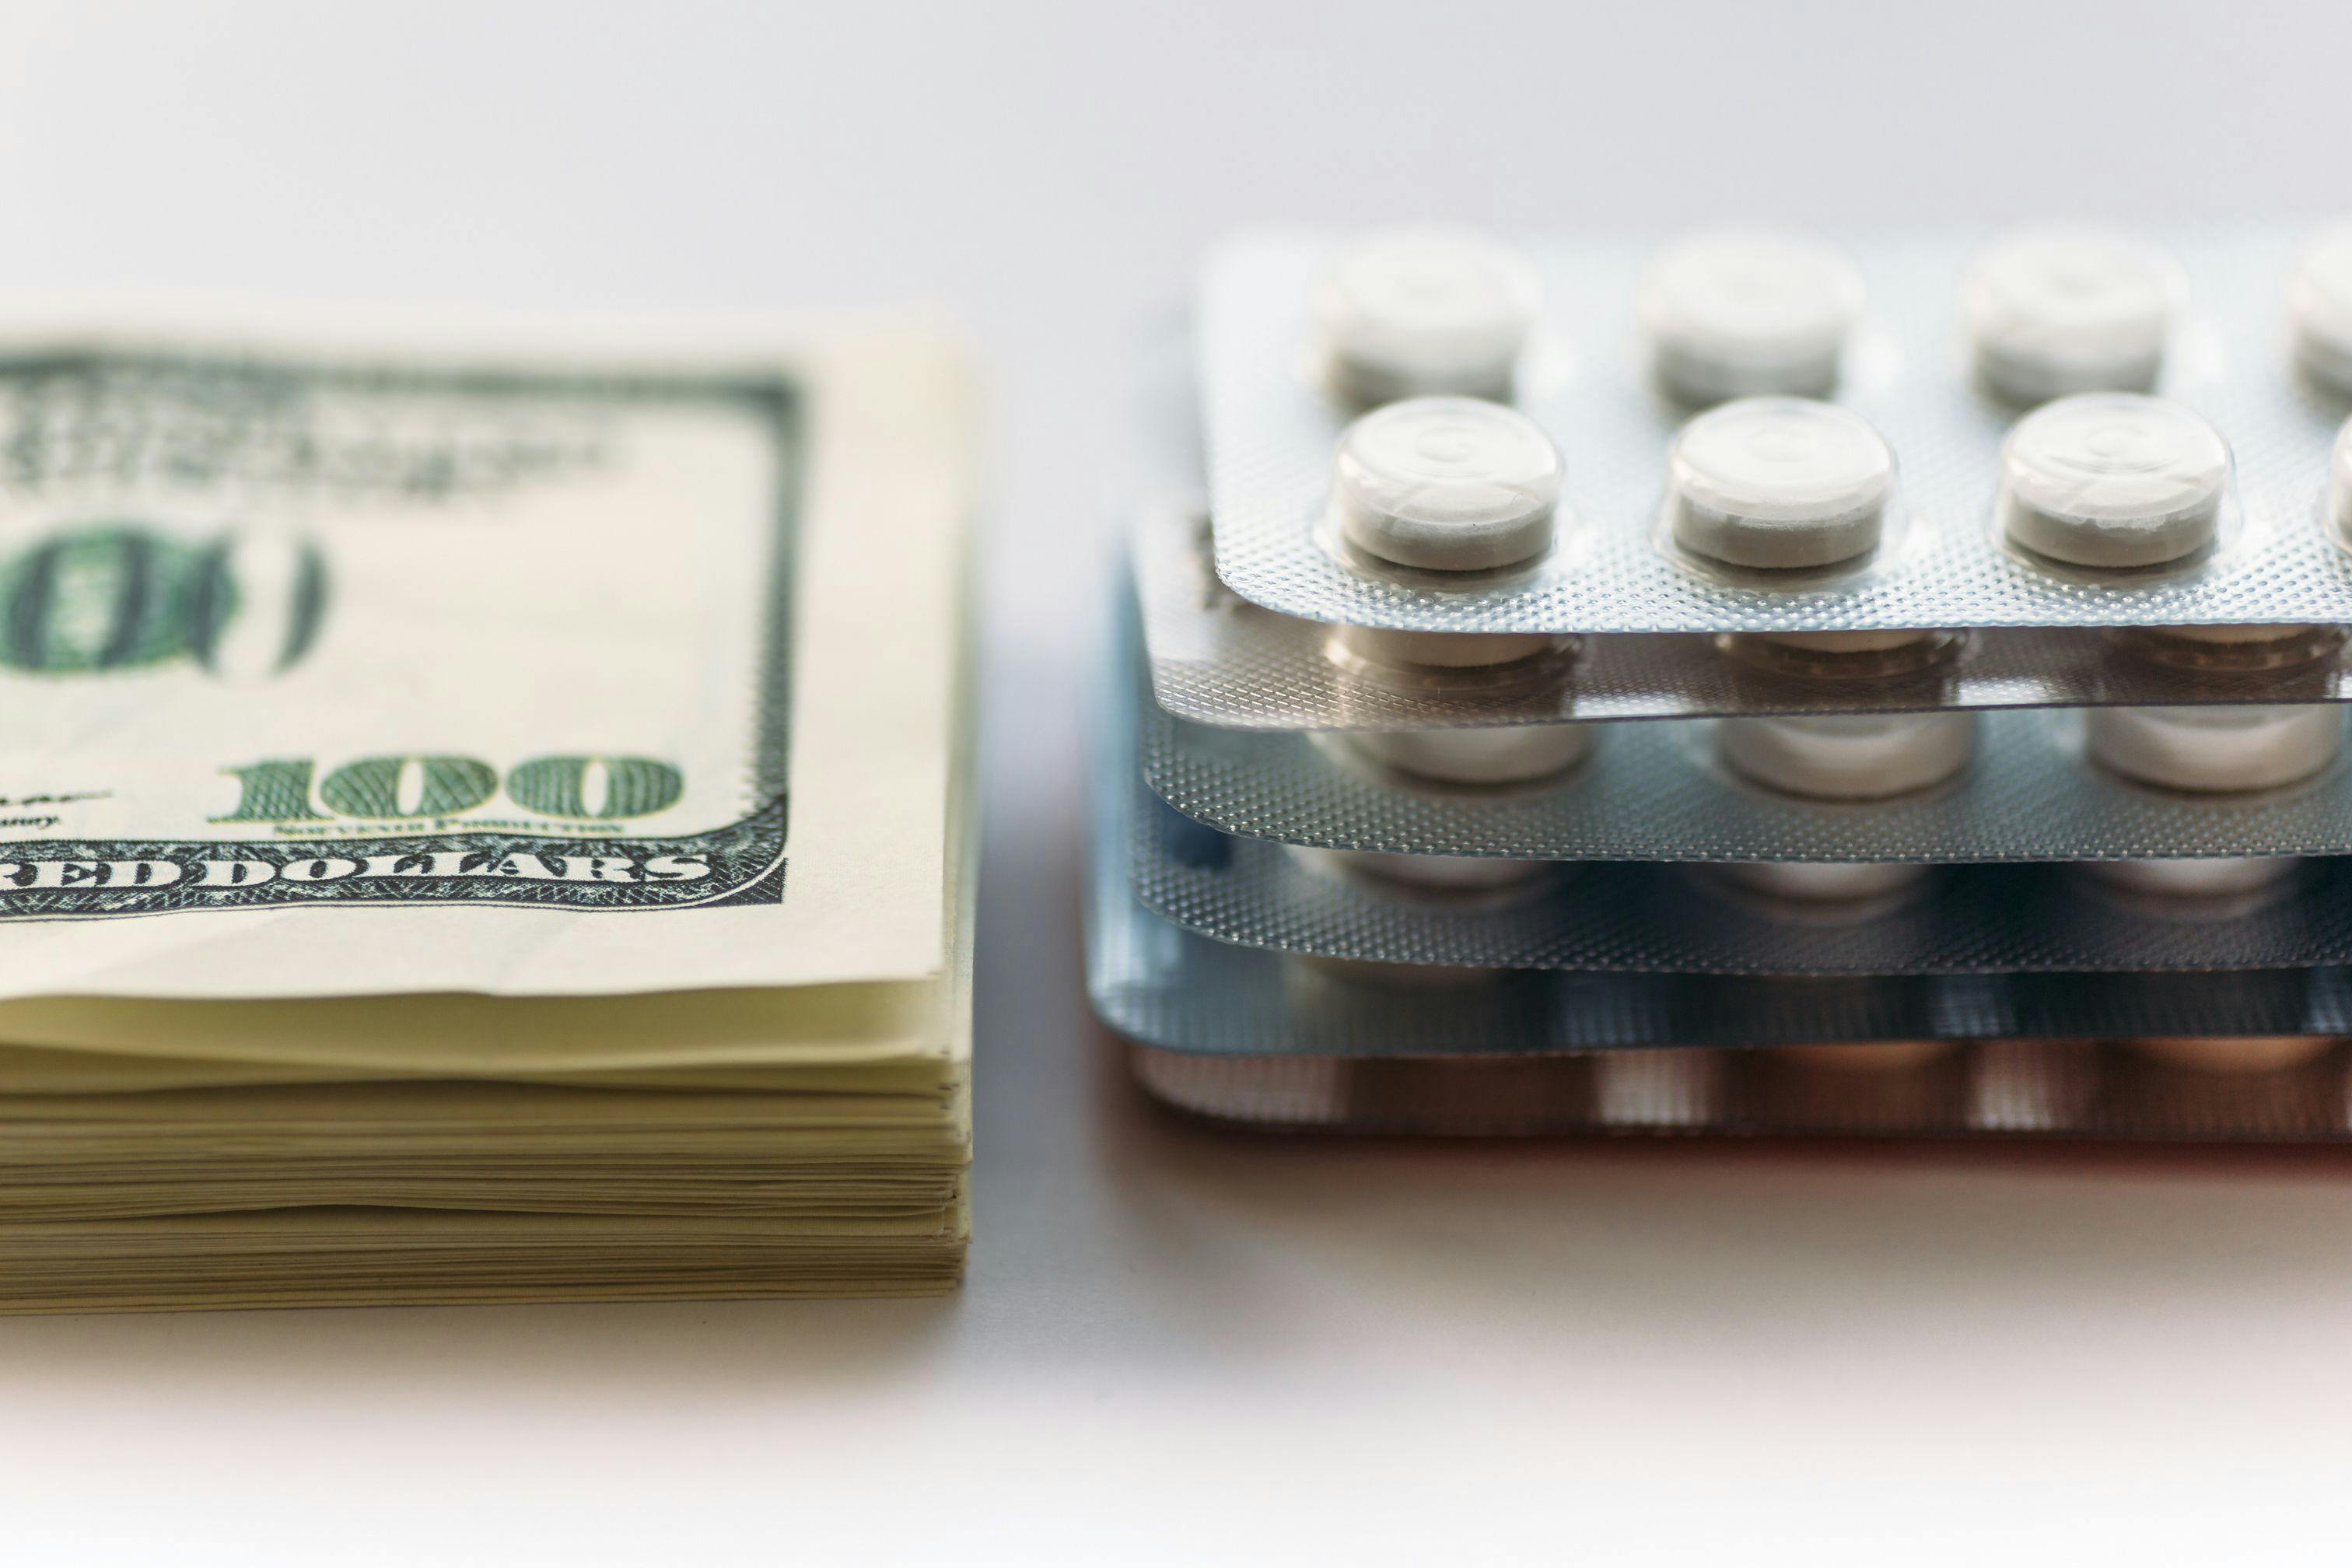 Image credit: DedMityay | stock.adobe.com. Bundle of money and pack of medication tablets or drug pills, close-up. Expensive health care concept